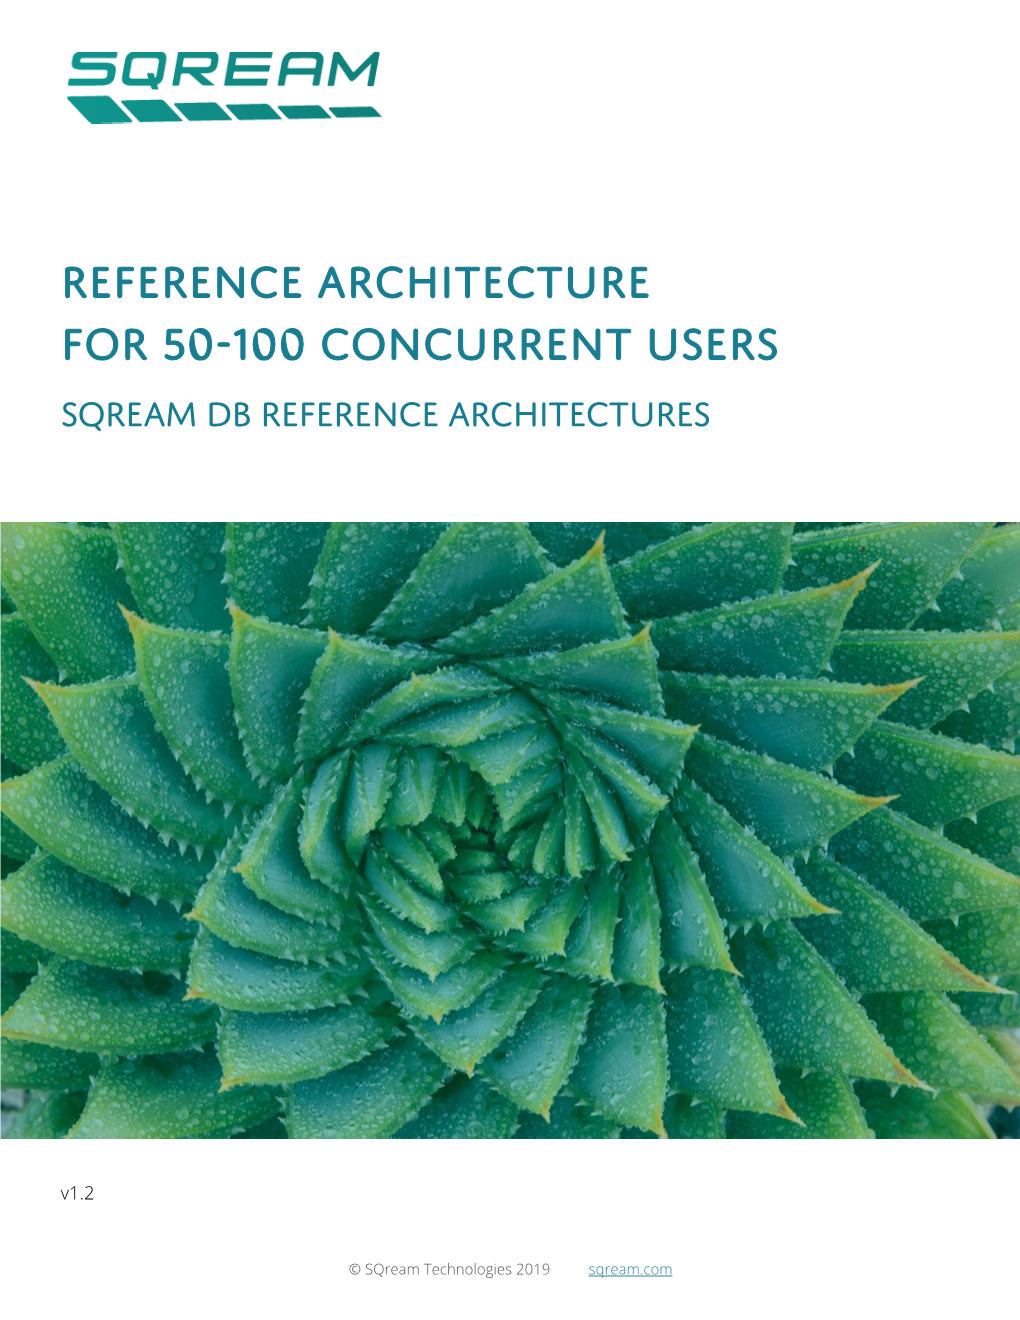 Reference Architecture for 50-100 CONCURRENT Users